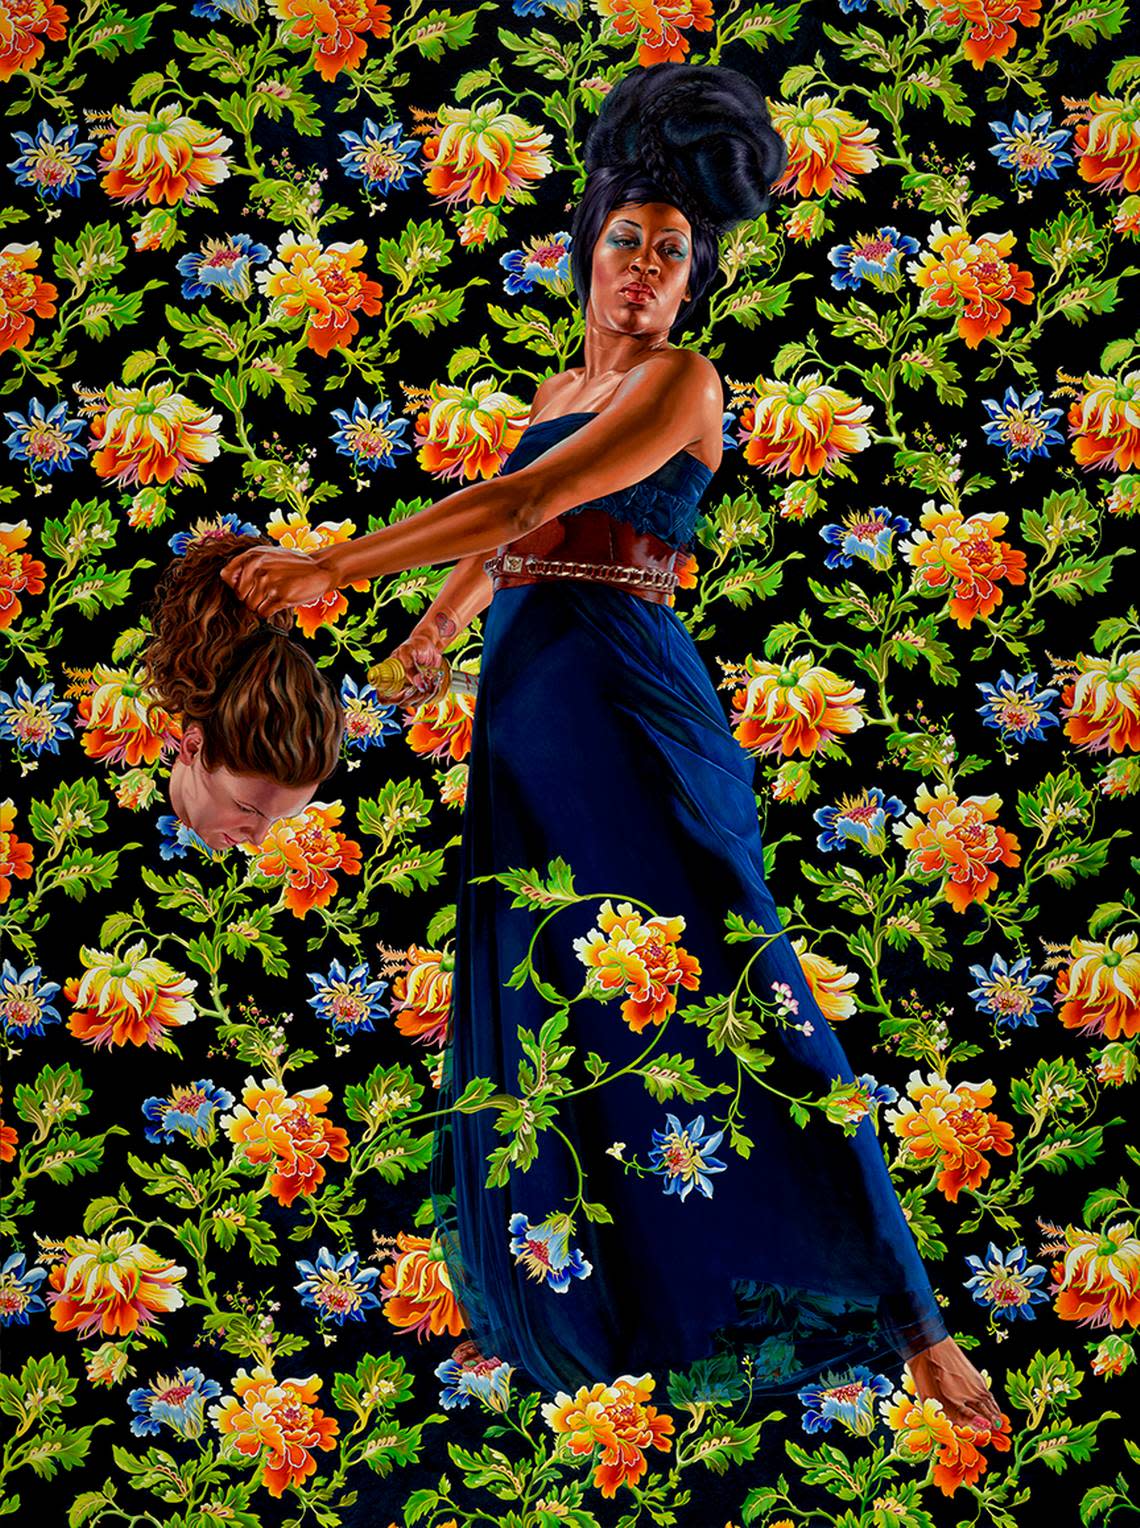 Kehinde Wiley’s “Judith and Holofernes” is on display at the Kimbell Art Museum in Fort Worth.